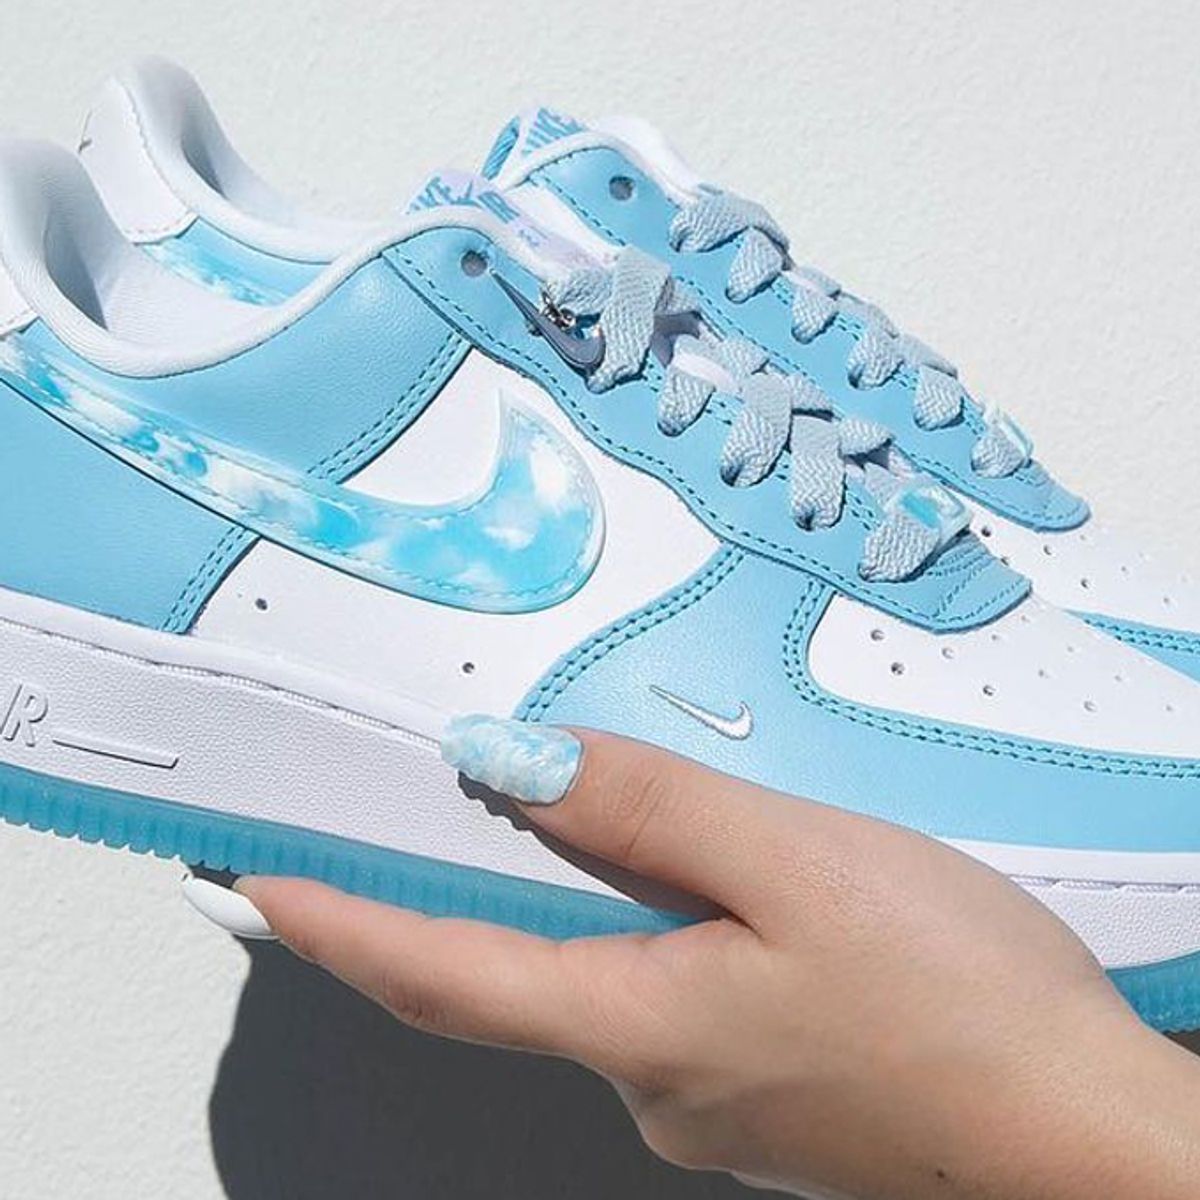 The Nike Air Force 1 Gets a 'Nail Art' Makeover Sneaker Freaker